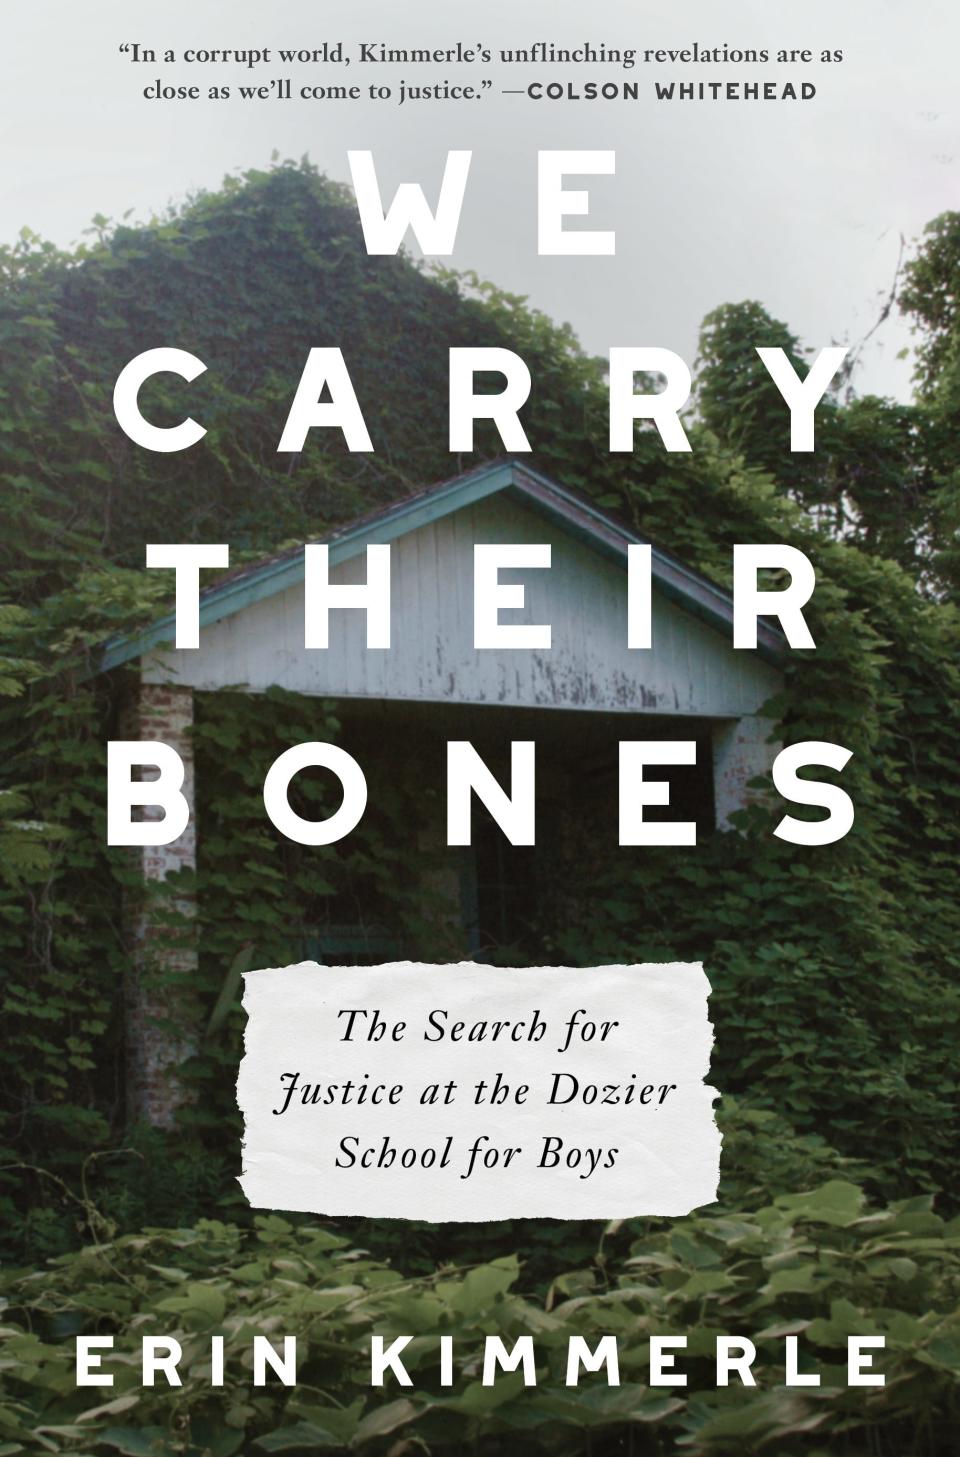 Image of cover of "We Carry Their Bones"